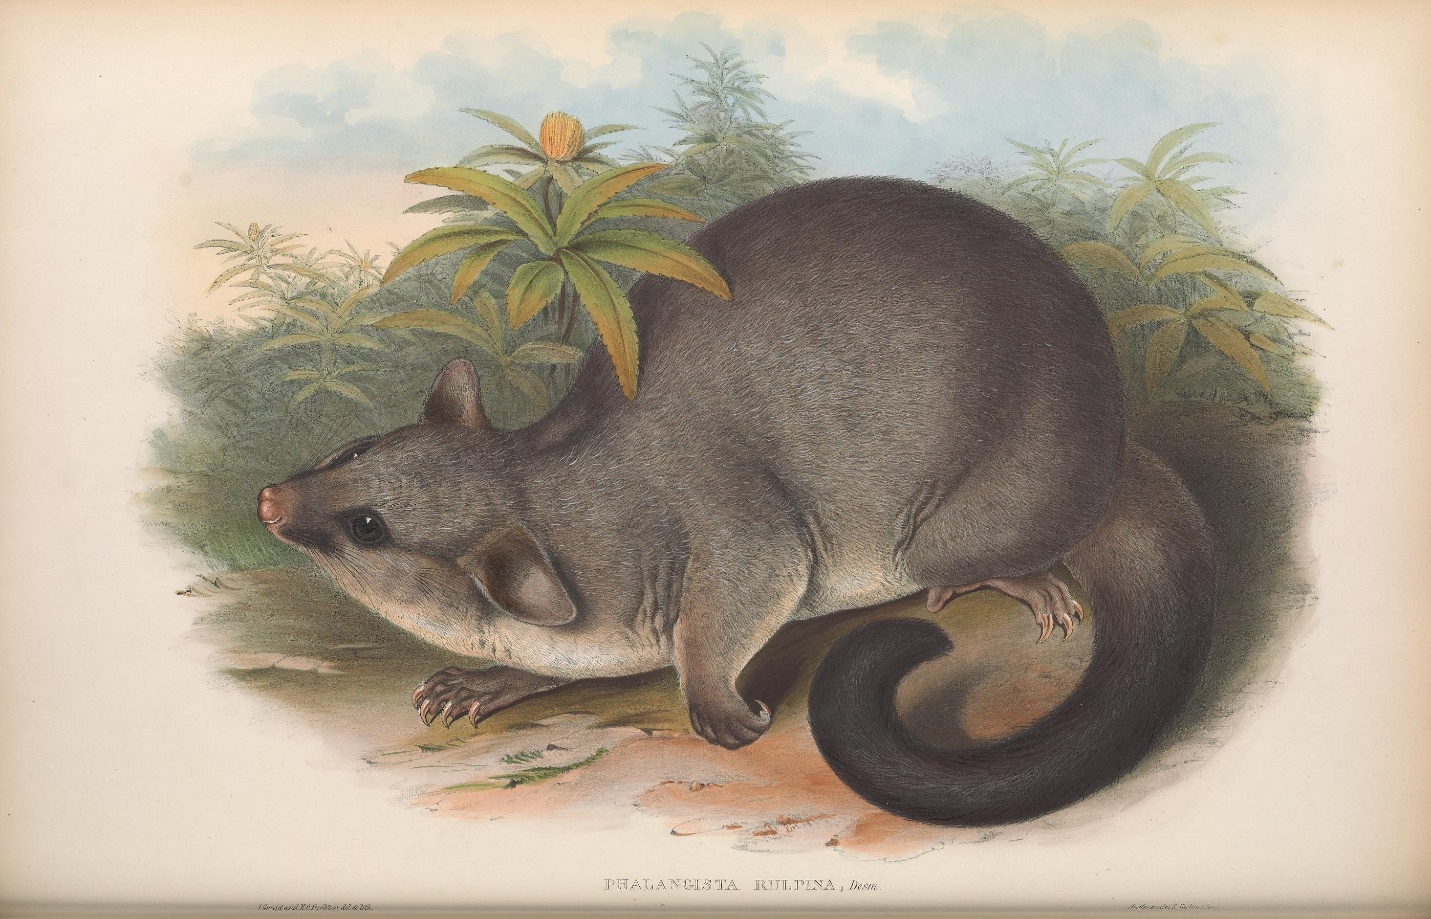 A colored lithographic image of a possum among ground
						cover.